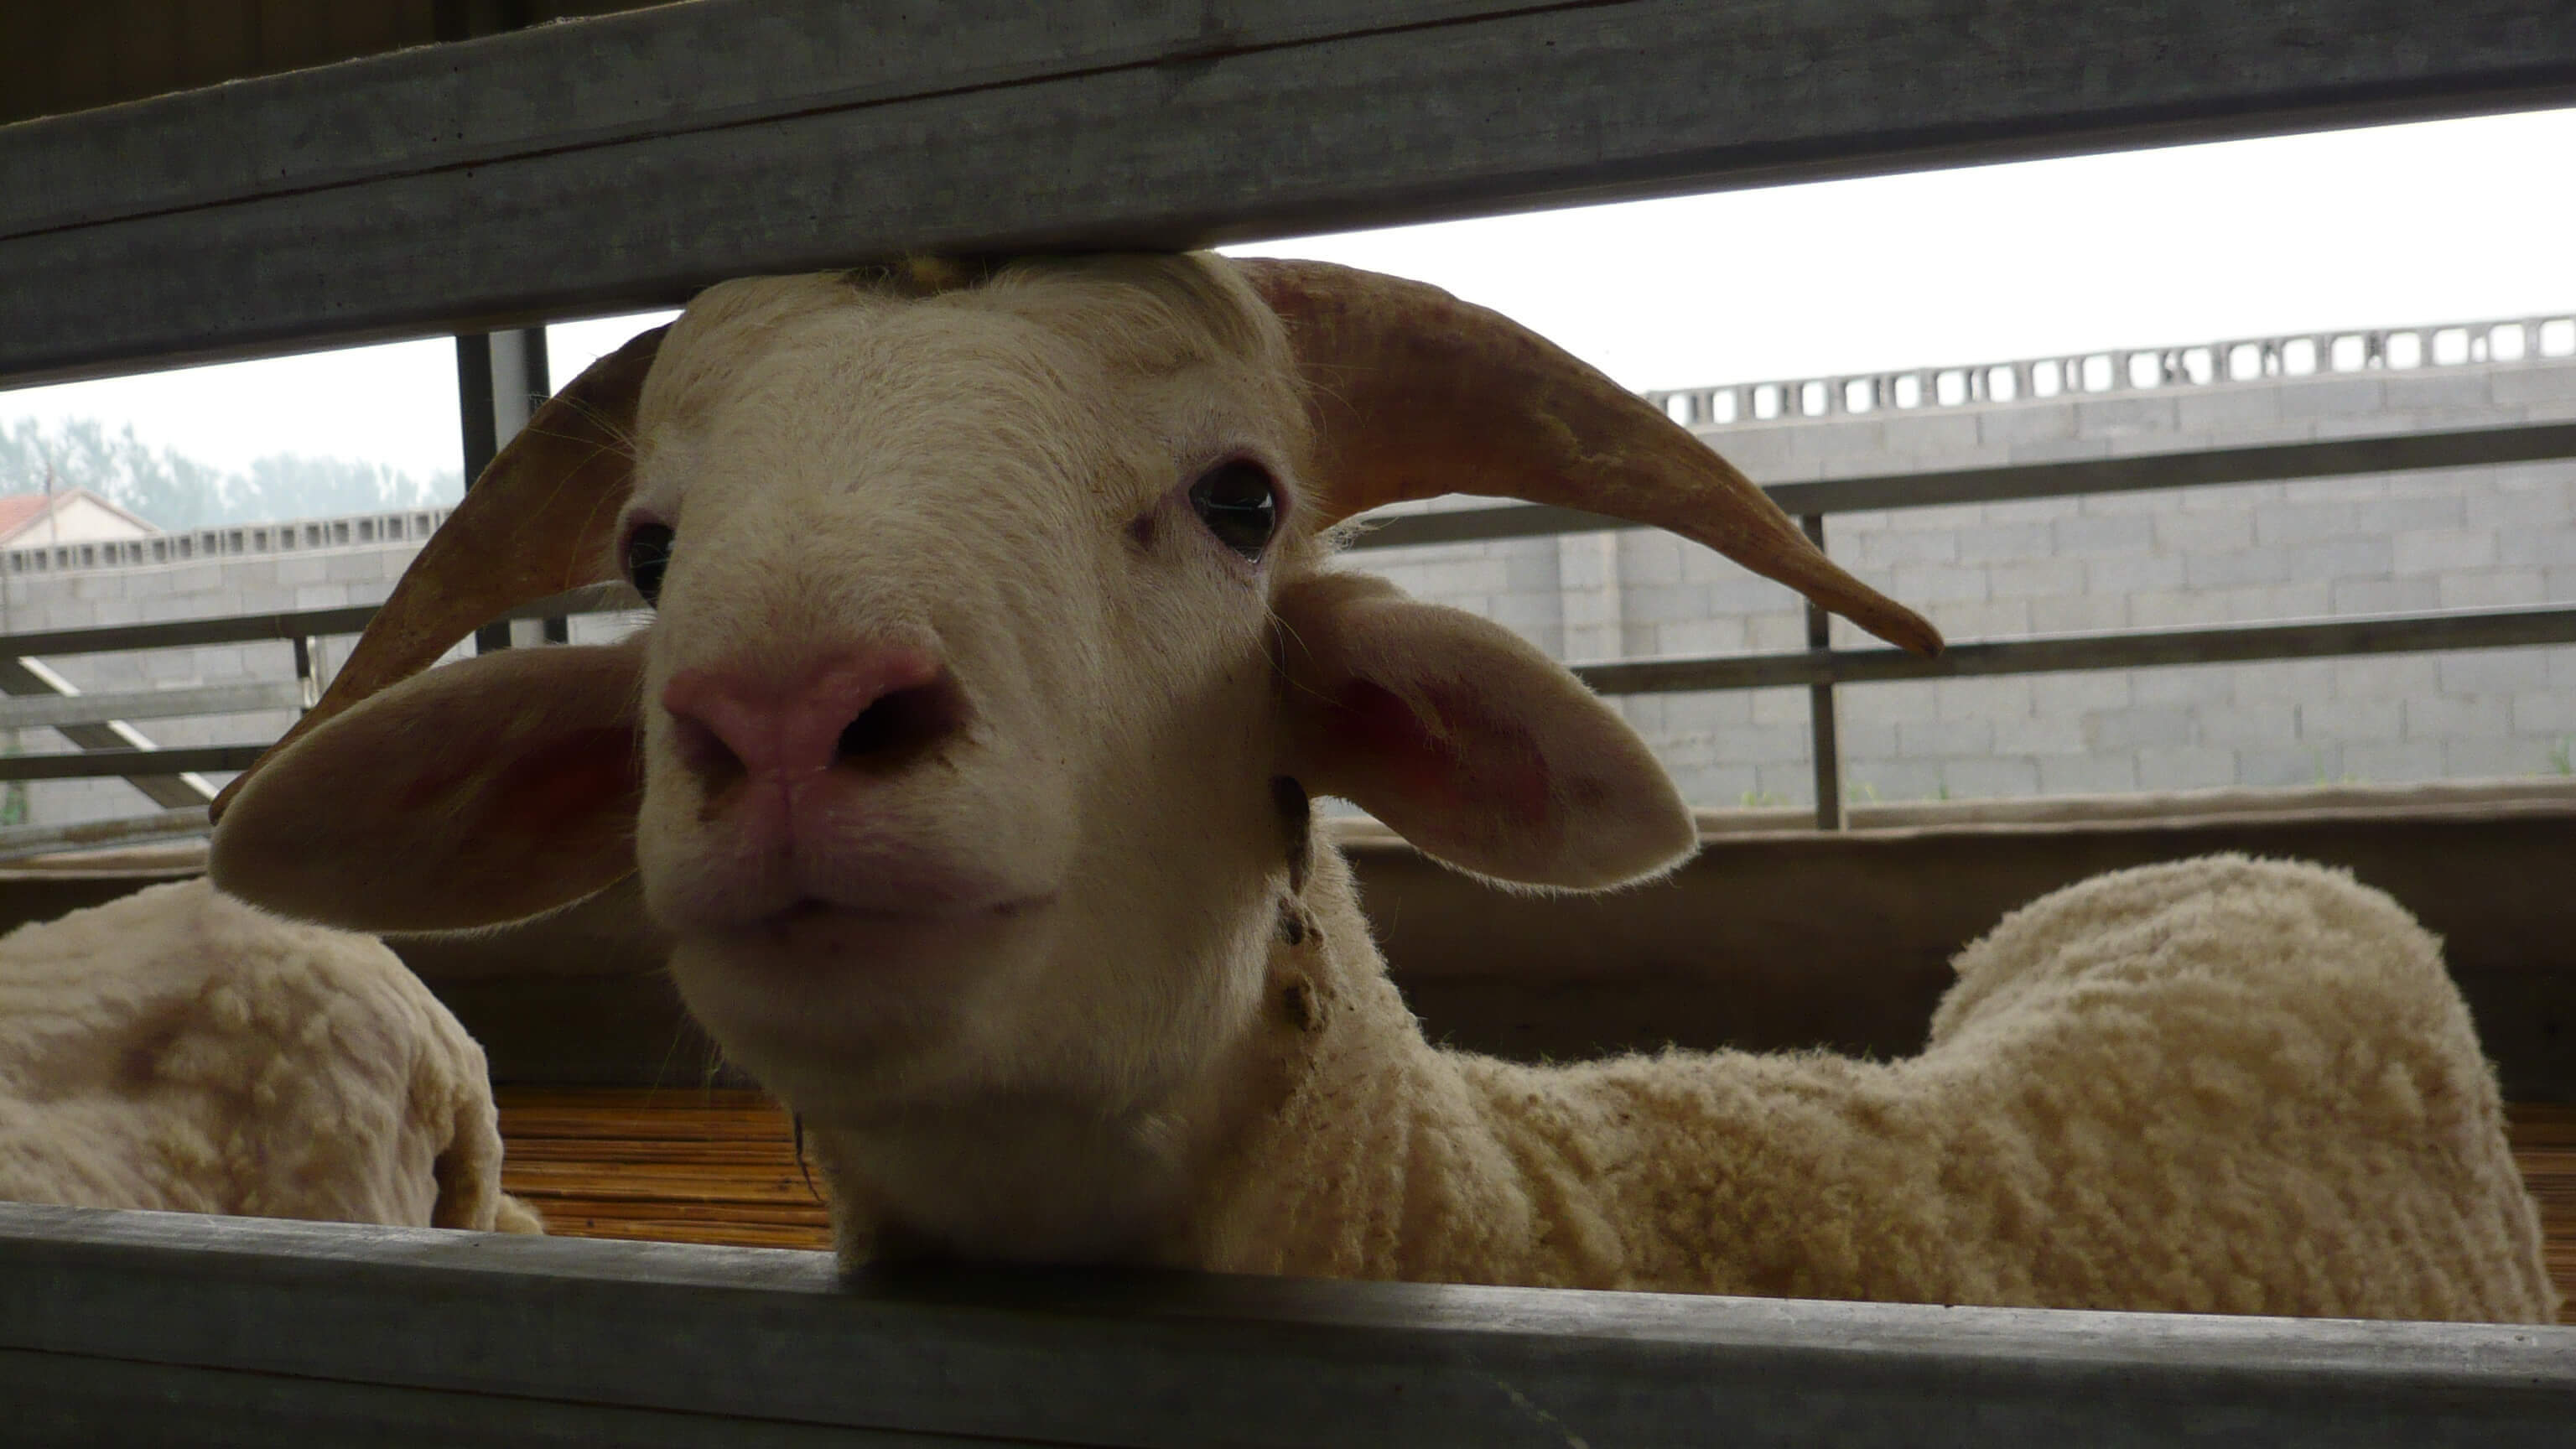 Urge Australian Minister to End Live Export